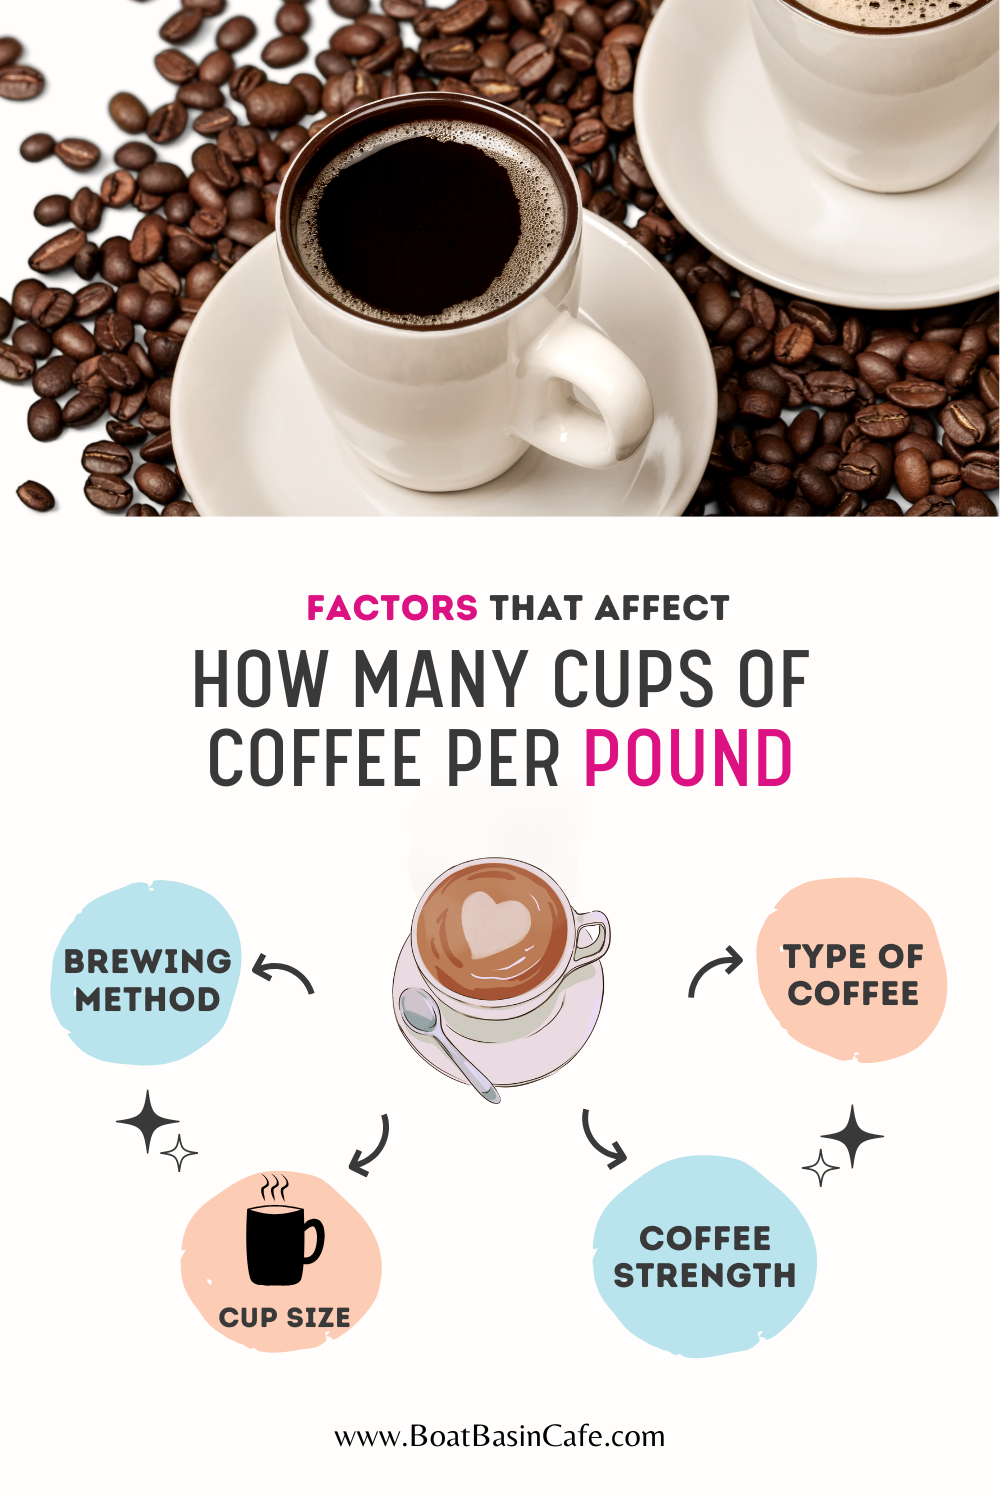 Factors Affecting How Many Cups Of Coffee Per Pound